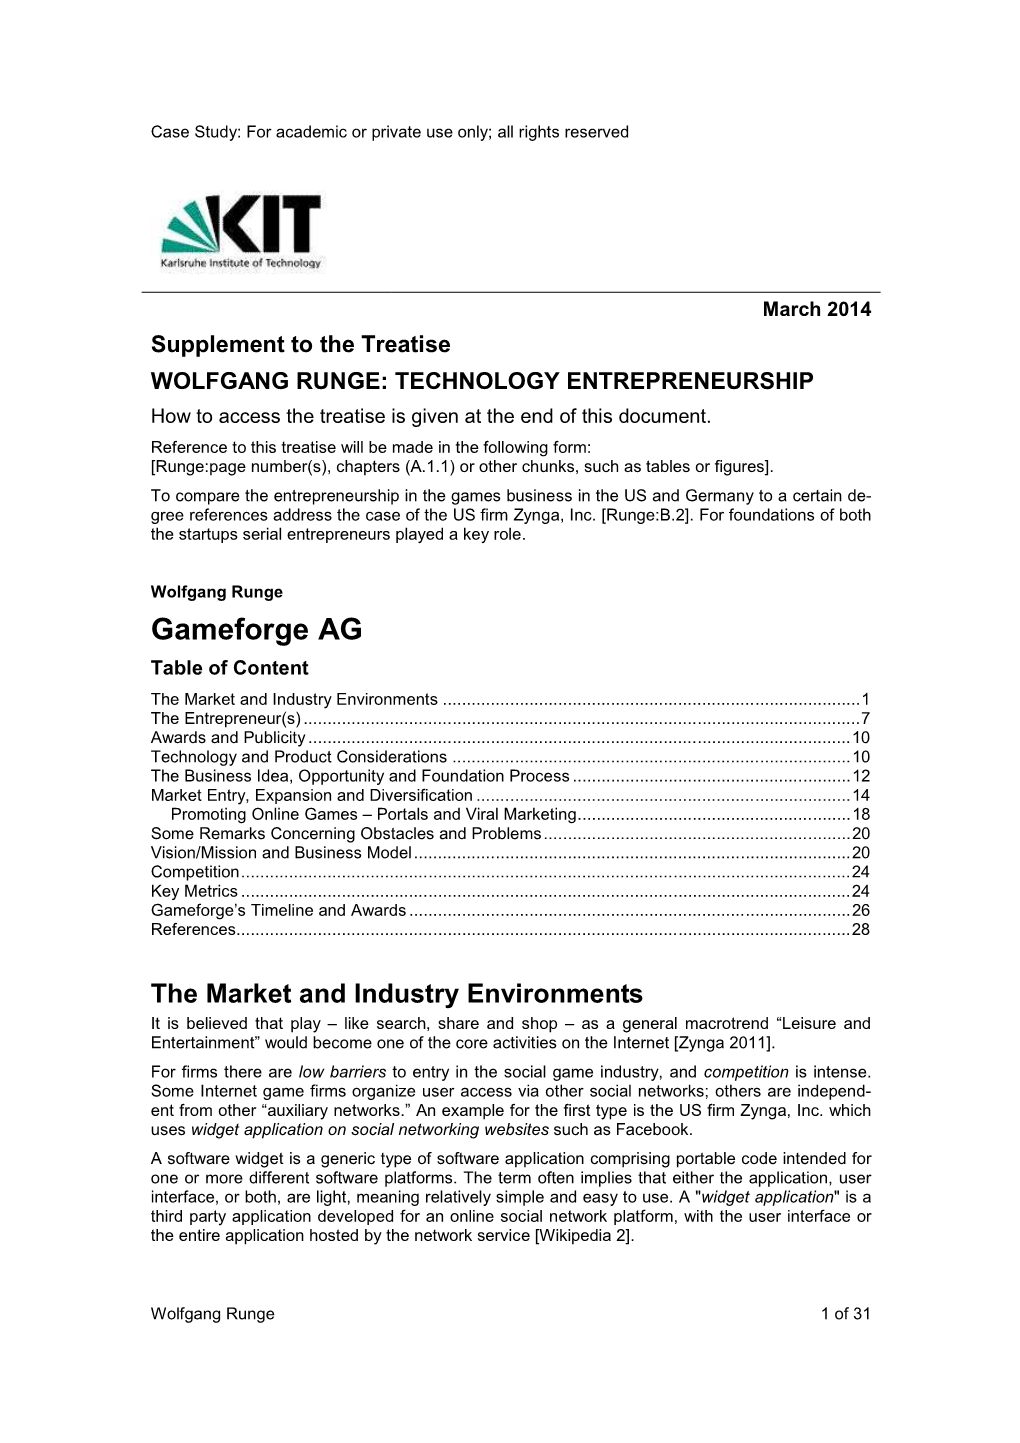 Gameforge AG Table of Content the Market and Industry Environments